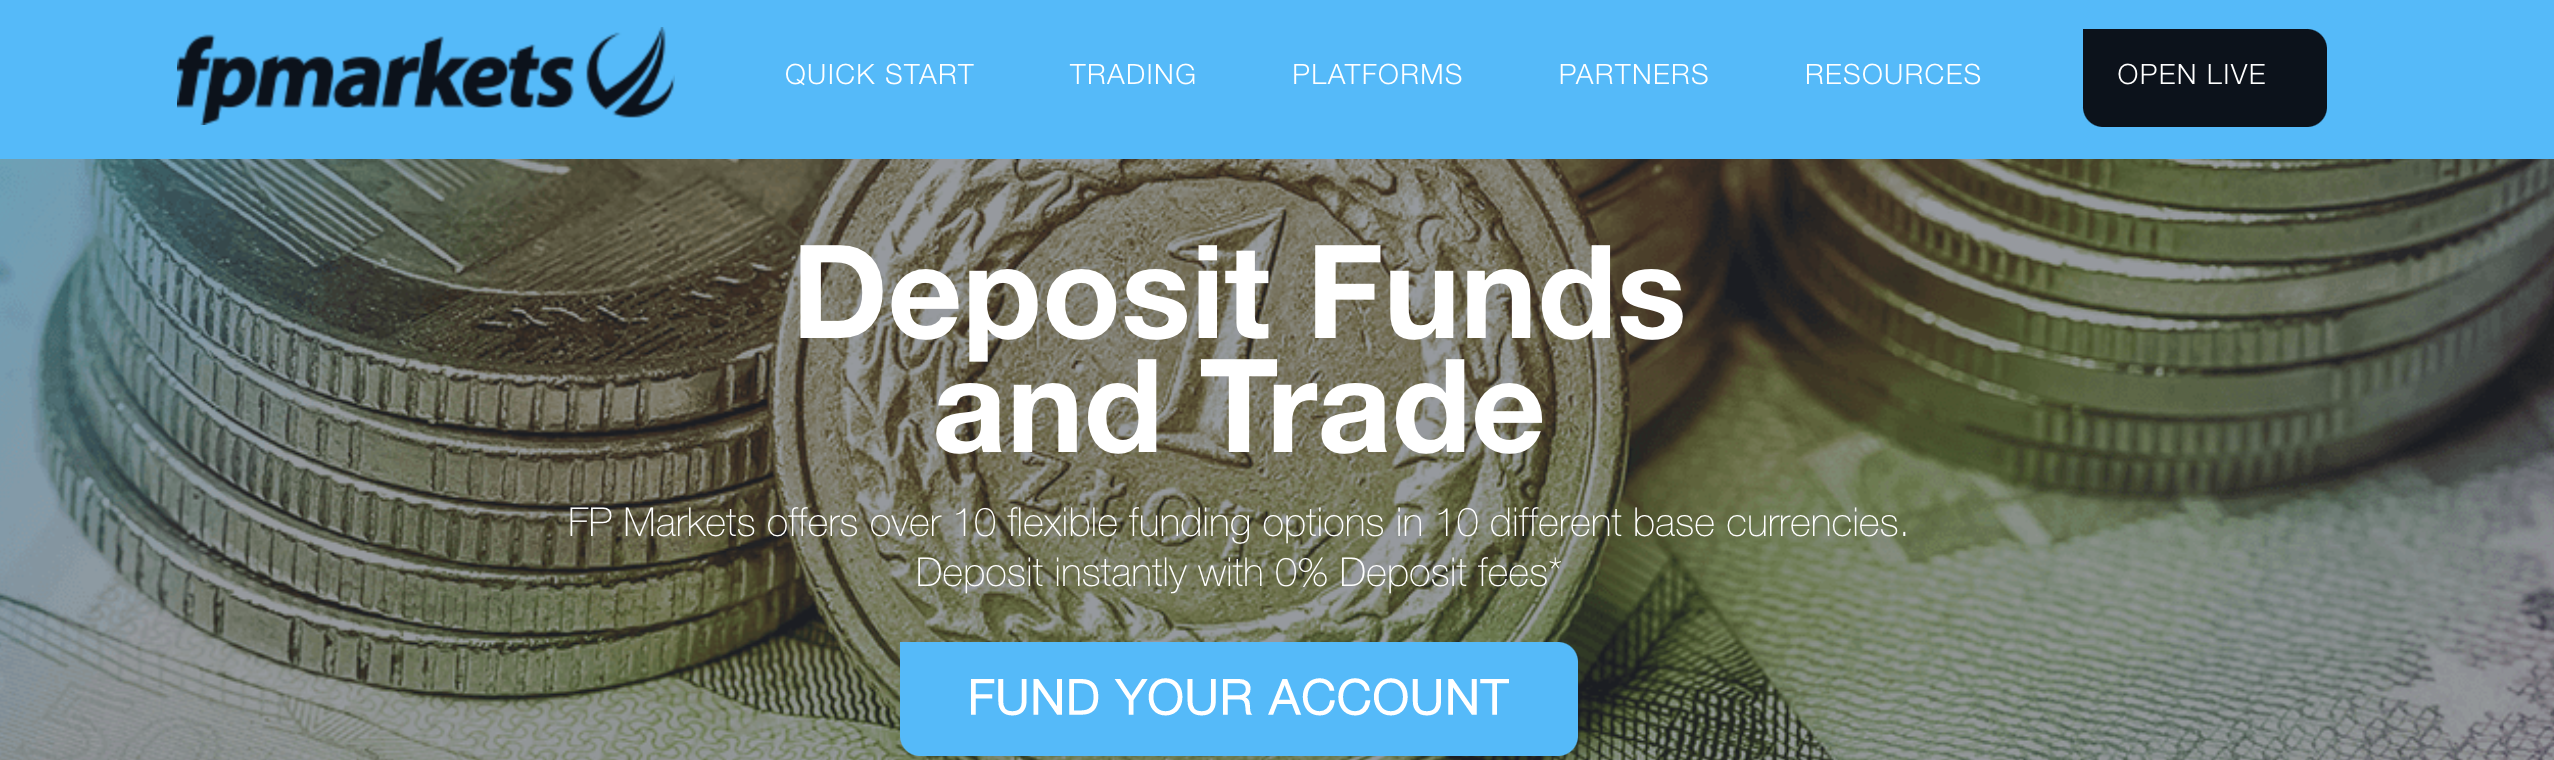 How to Deposit Funds with FP Markets